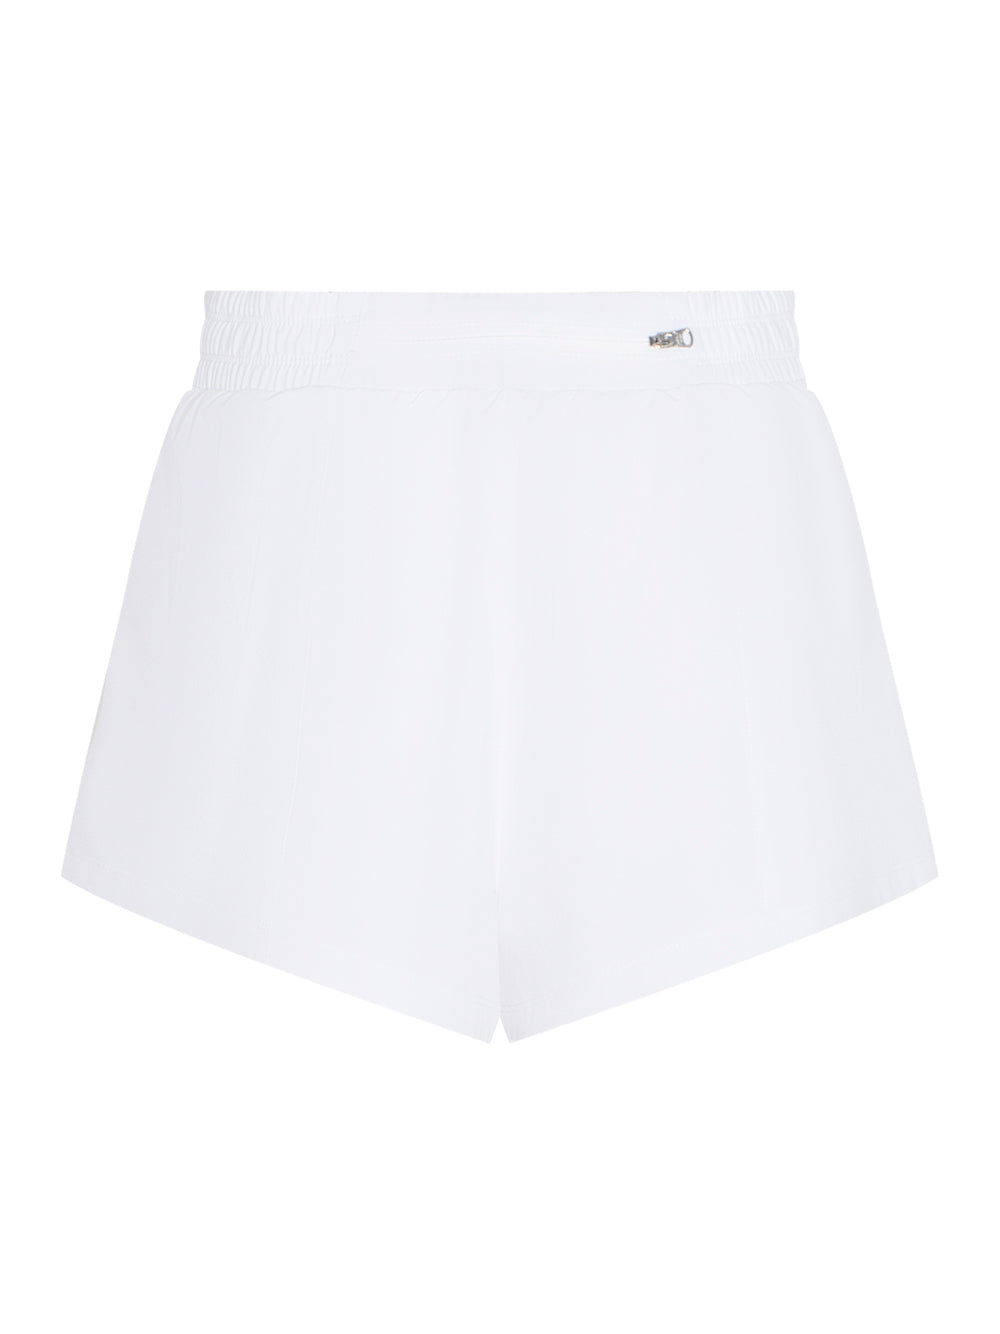 Double Layer Training Short With Runners Pocket And Logo (White)